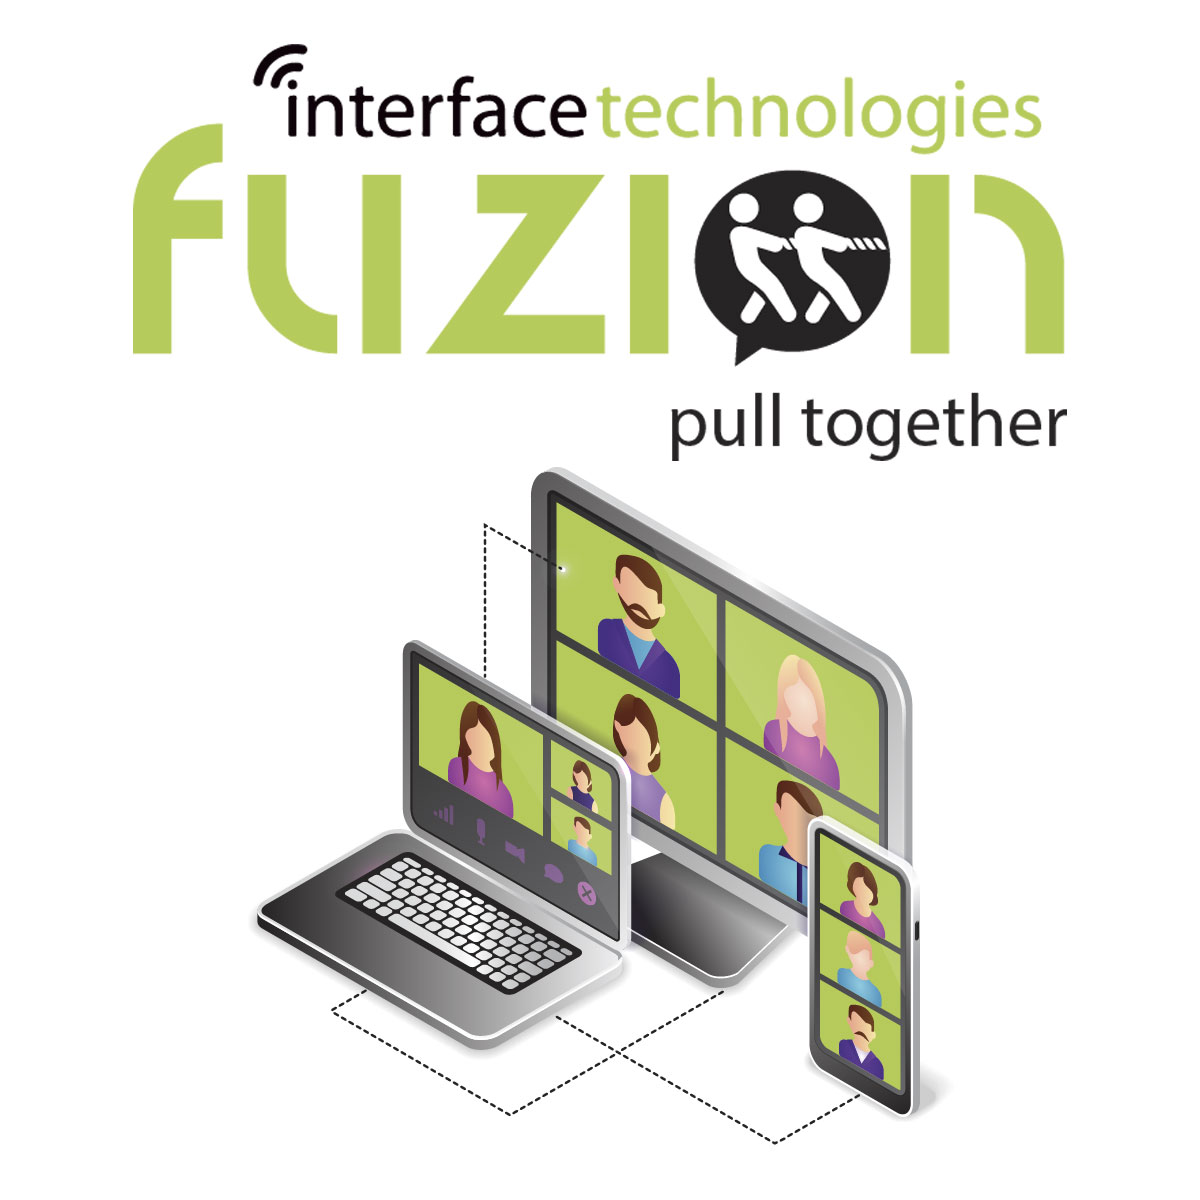 Avoid video crashes, echoes, time lags, and login loops with Fuzion